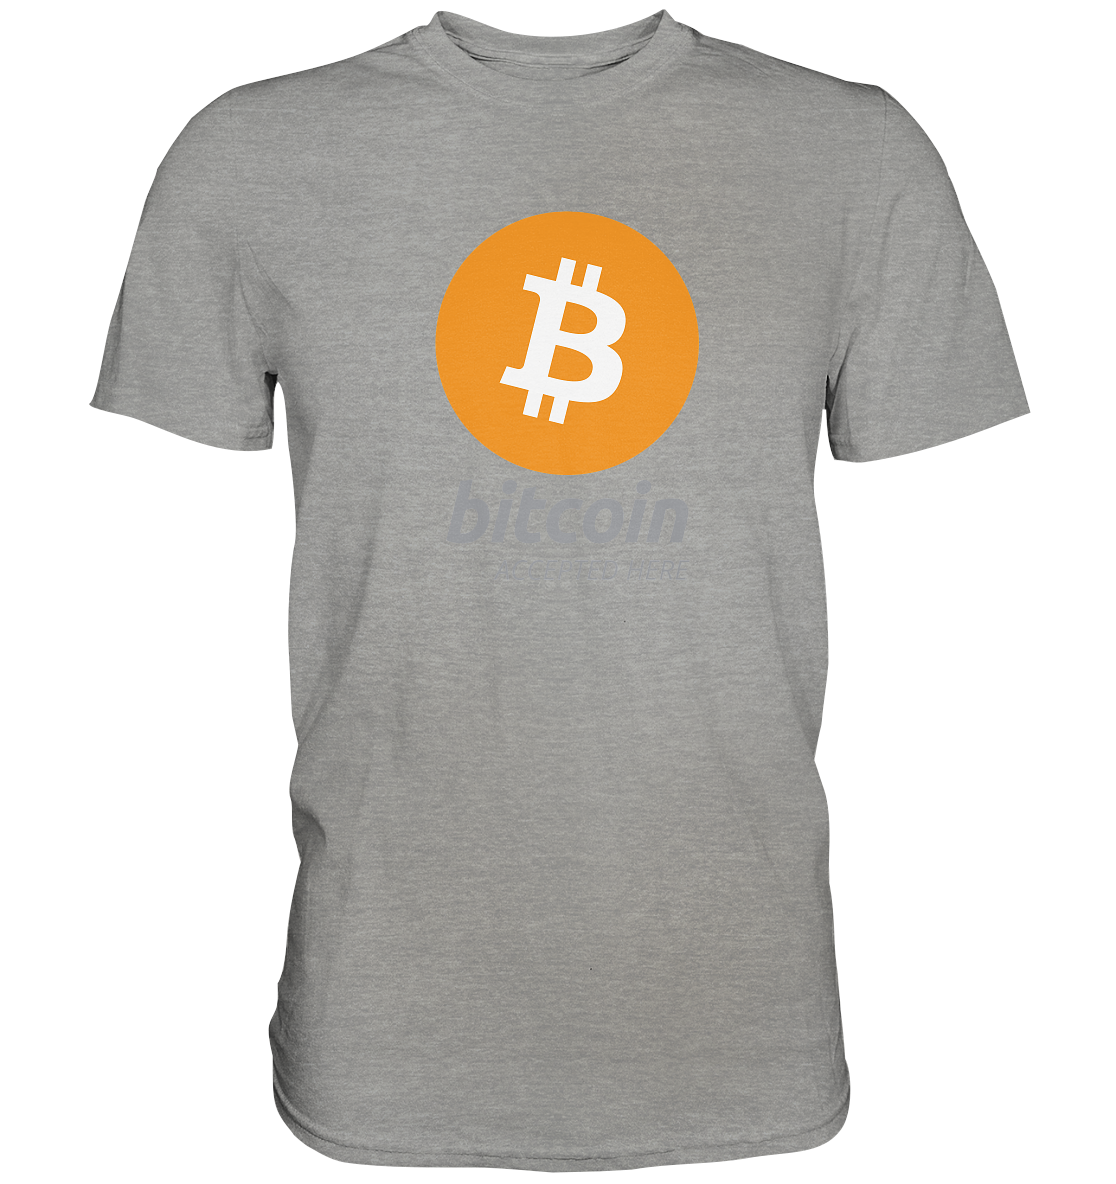 Bitcoin accepted here - Premium Shirt